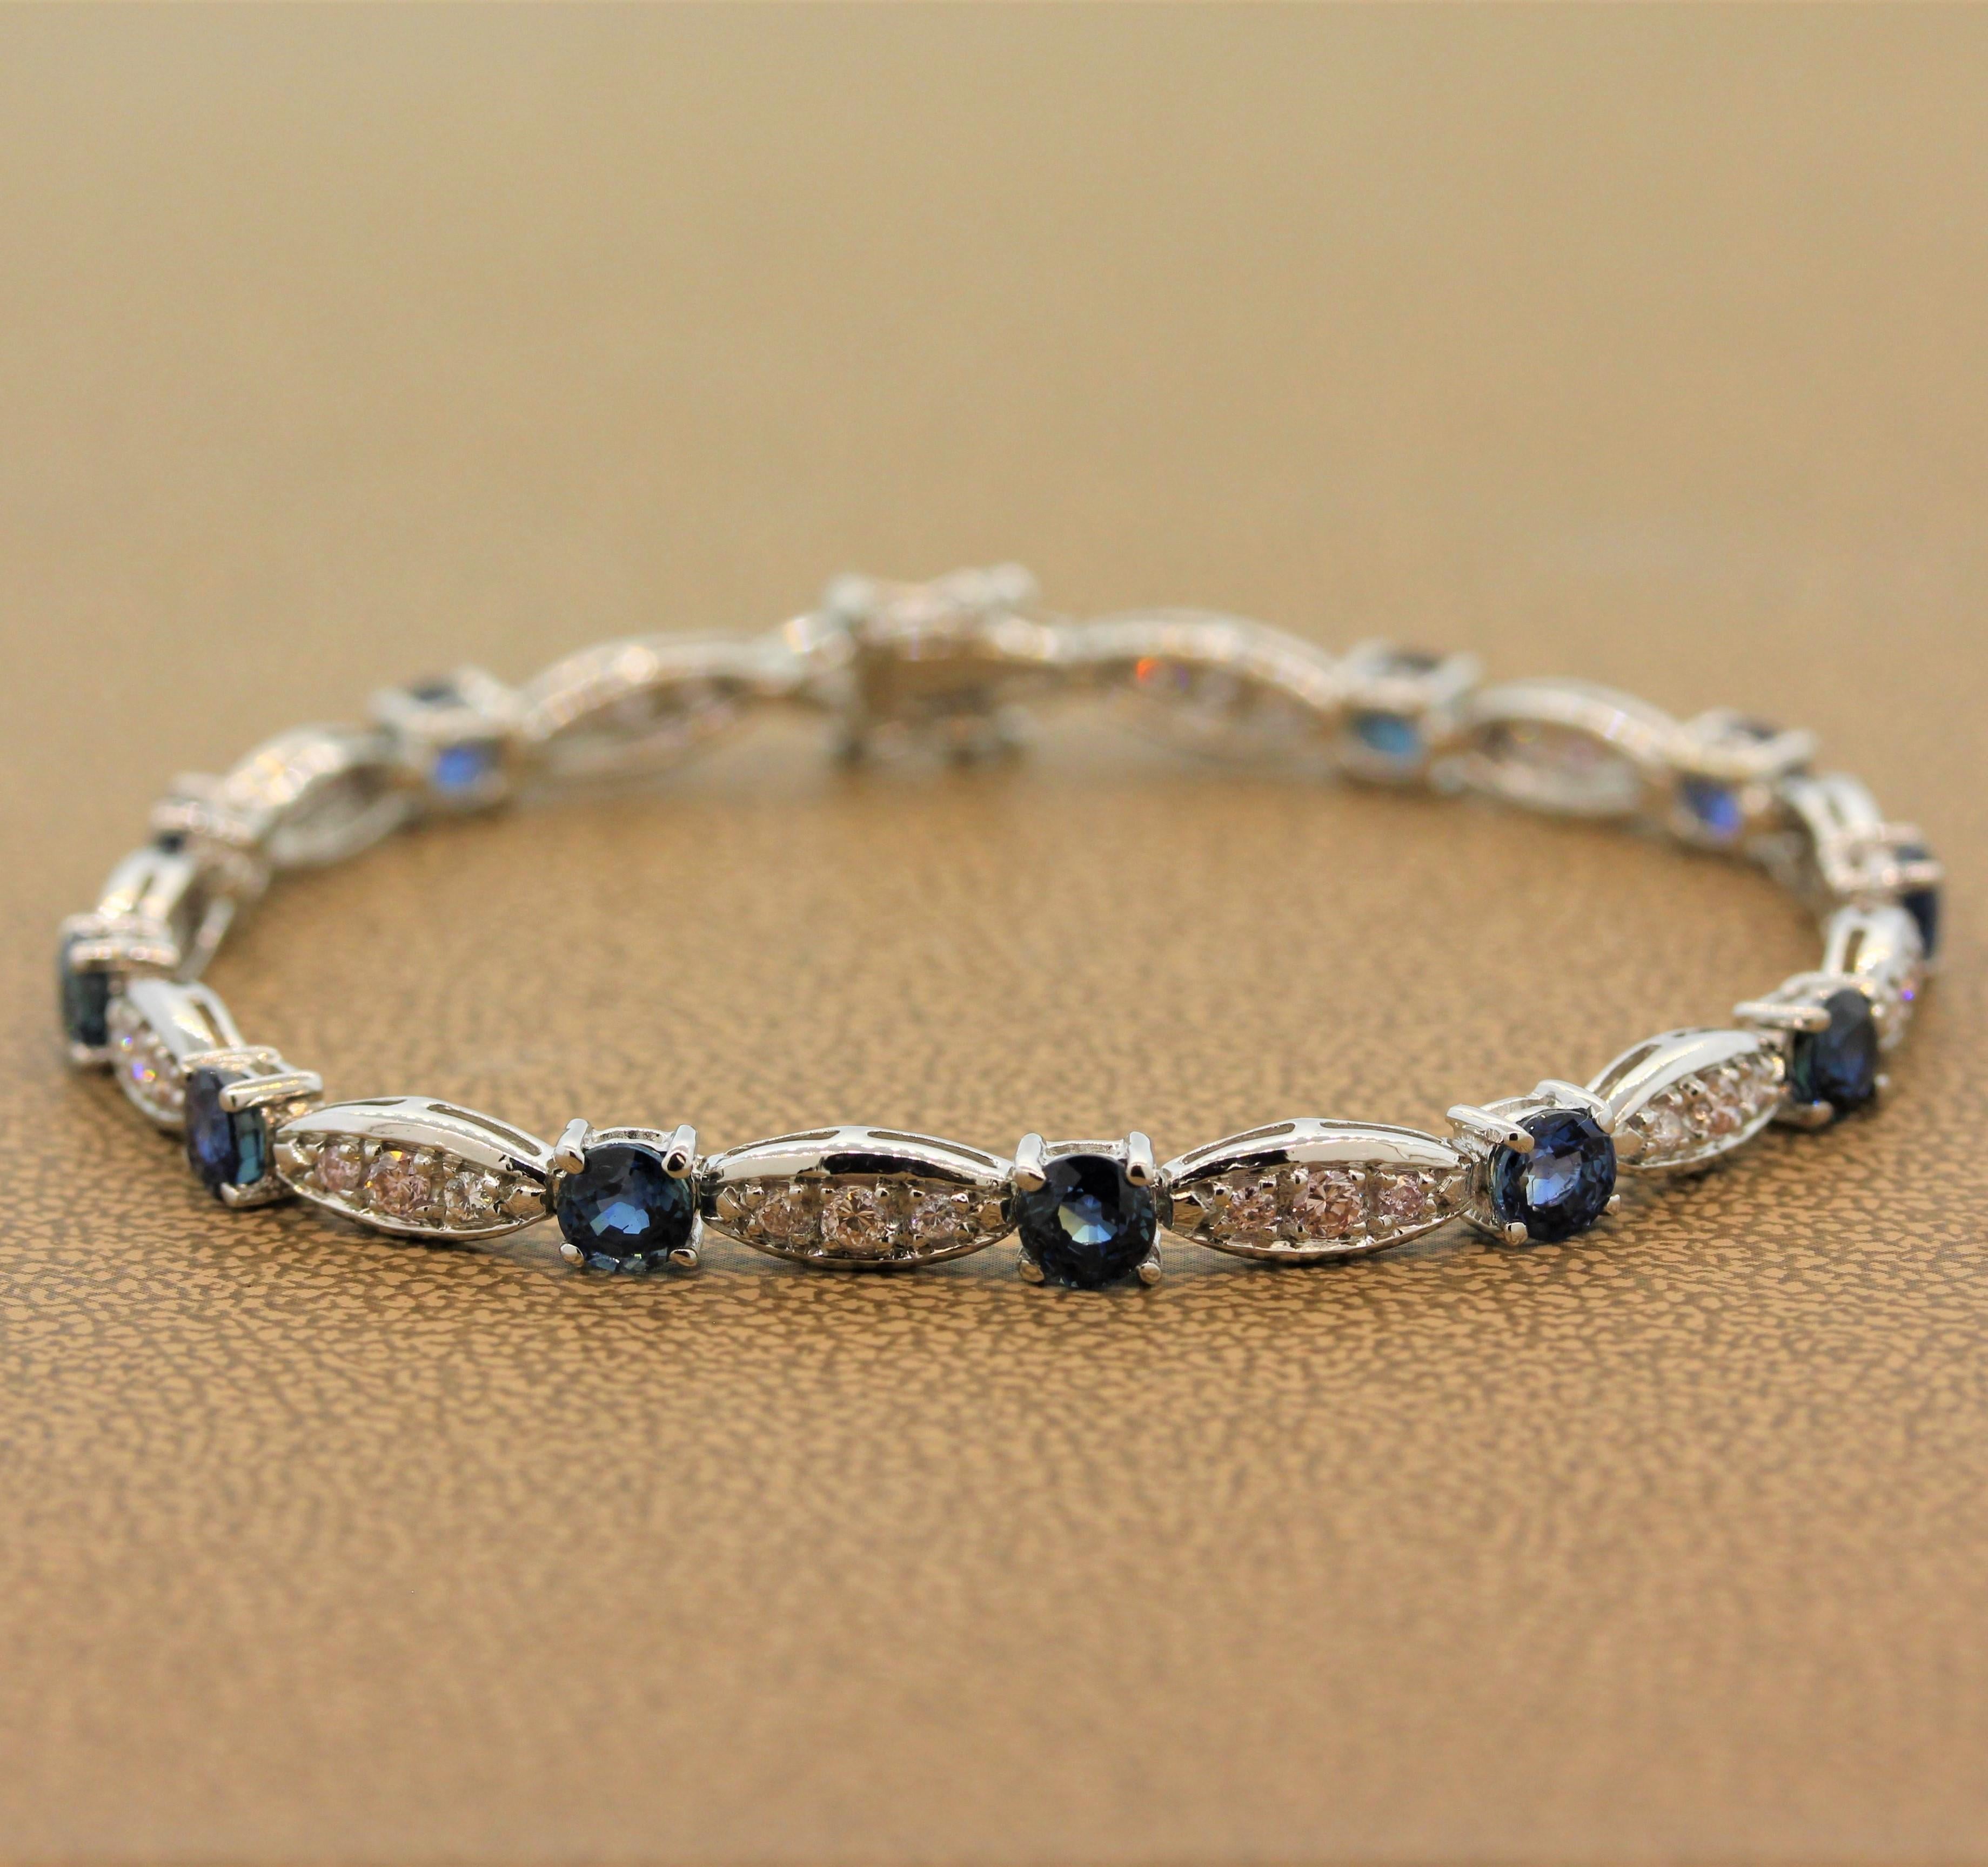 A spectacularly unique bracelet which features both vivid blue sapphire and fancy pink diamonds, a rare combination. The simple yet substantial bracelet is set with 4.25 carats of round blue sapphire and 0.88 carats of fancy pink and colorless